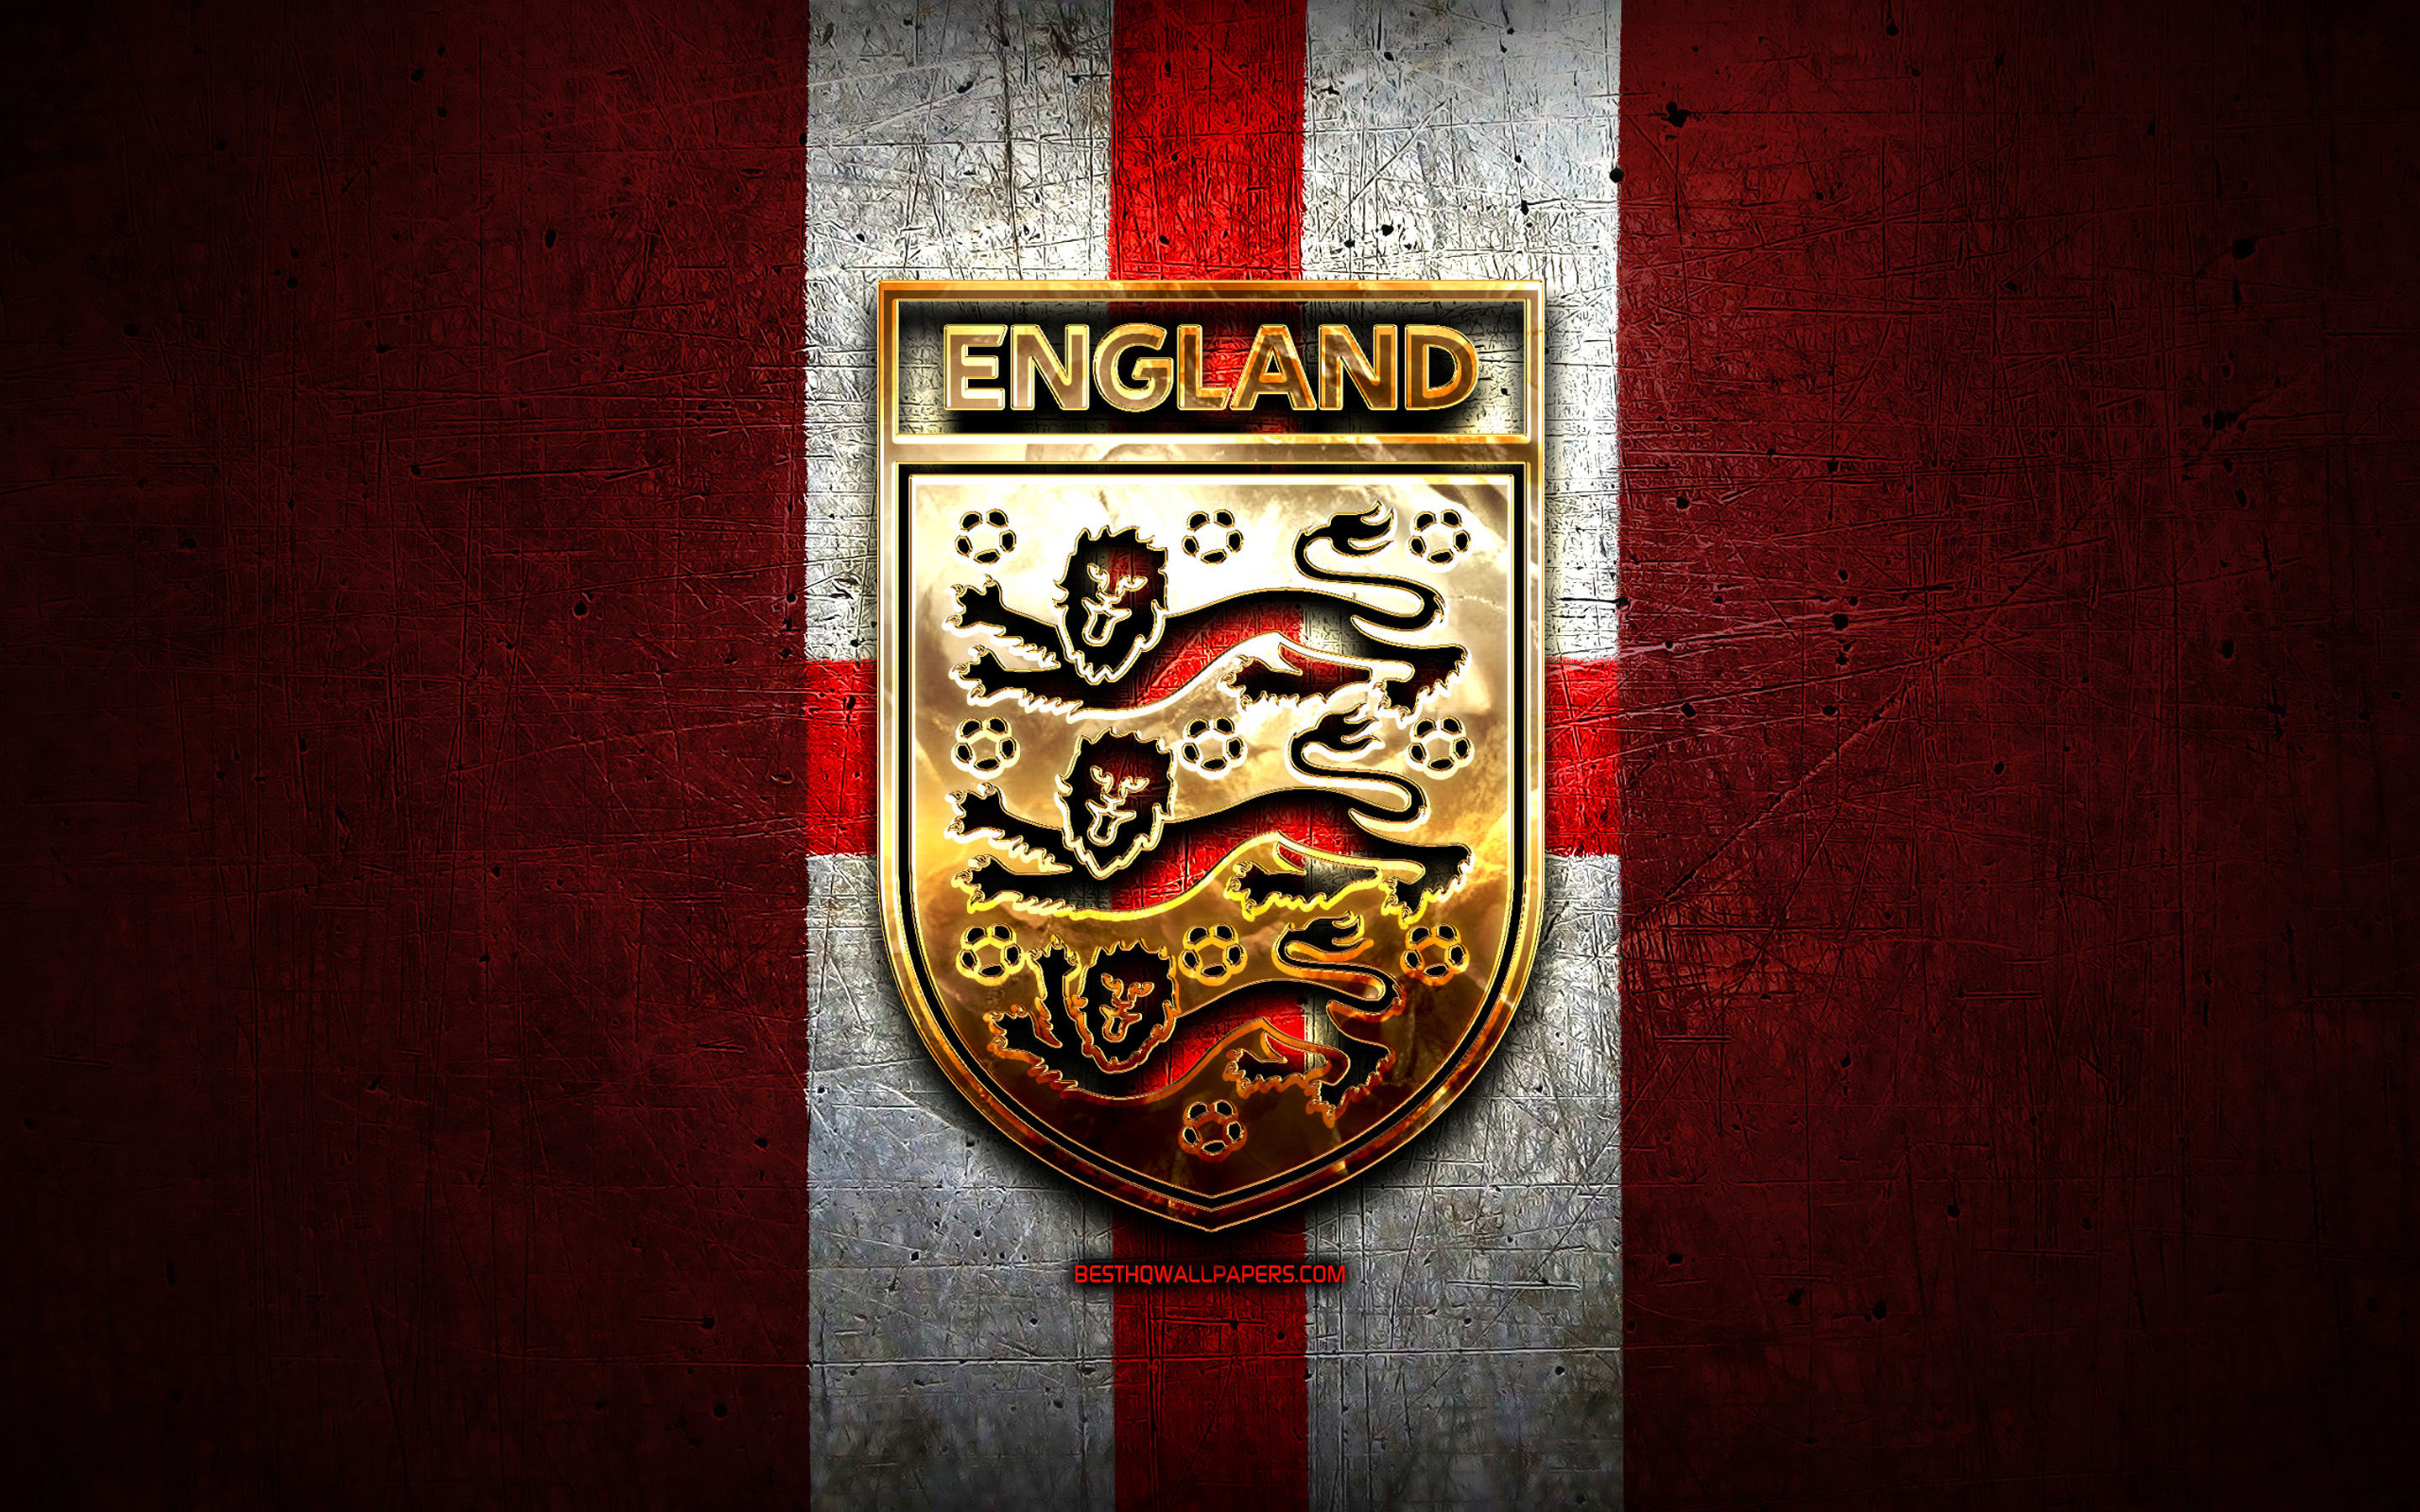 Download wallpaper England National Football Team, golden logo, Europe, UEFA, red metal background, English football team, soccer, EFA logo, football, England for desktop with resolution 2880x1800. High Quality HD picture wallpaper